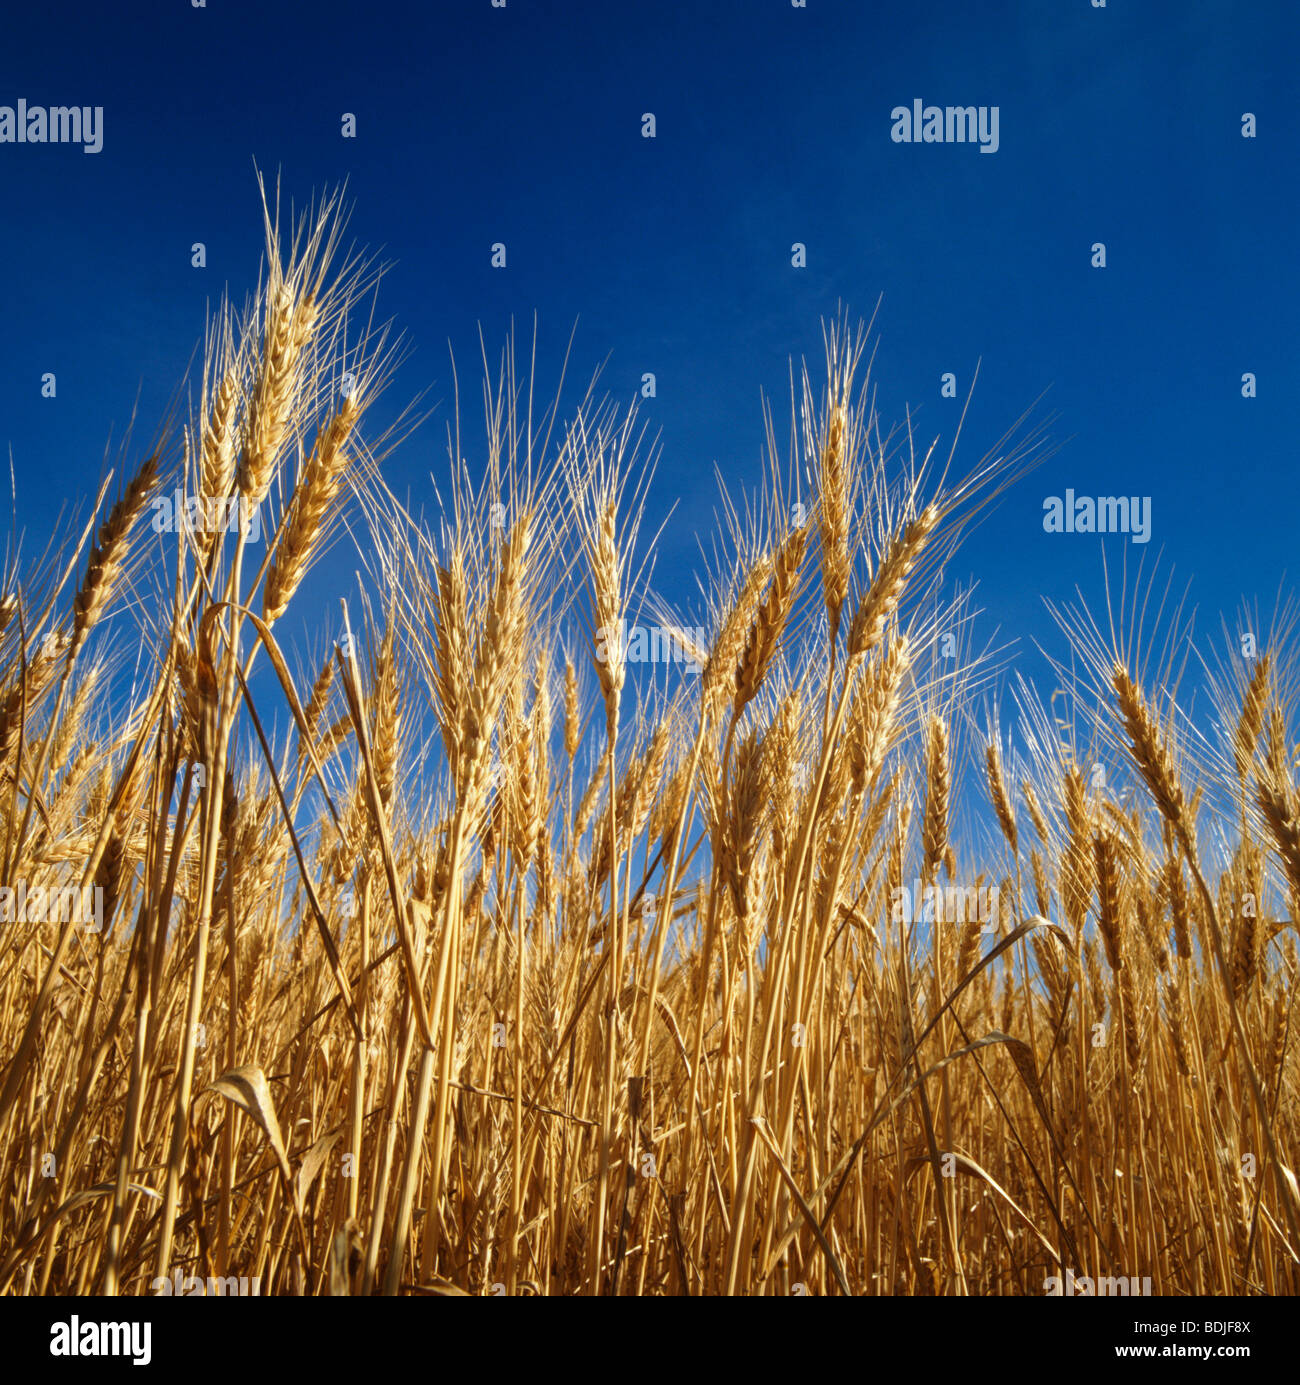 Wheat, Ready for Harvest, Close-up Stock Photo